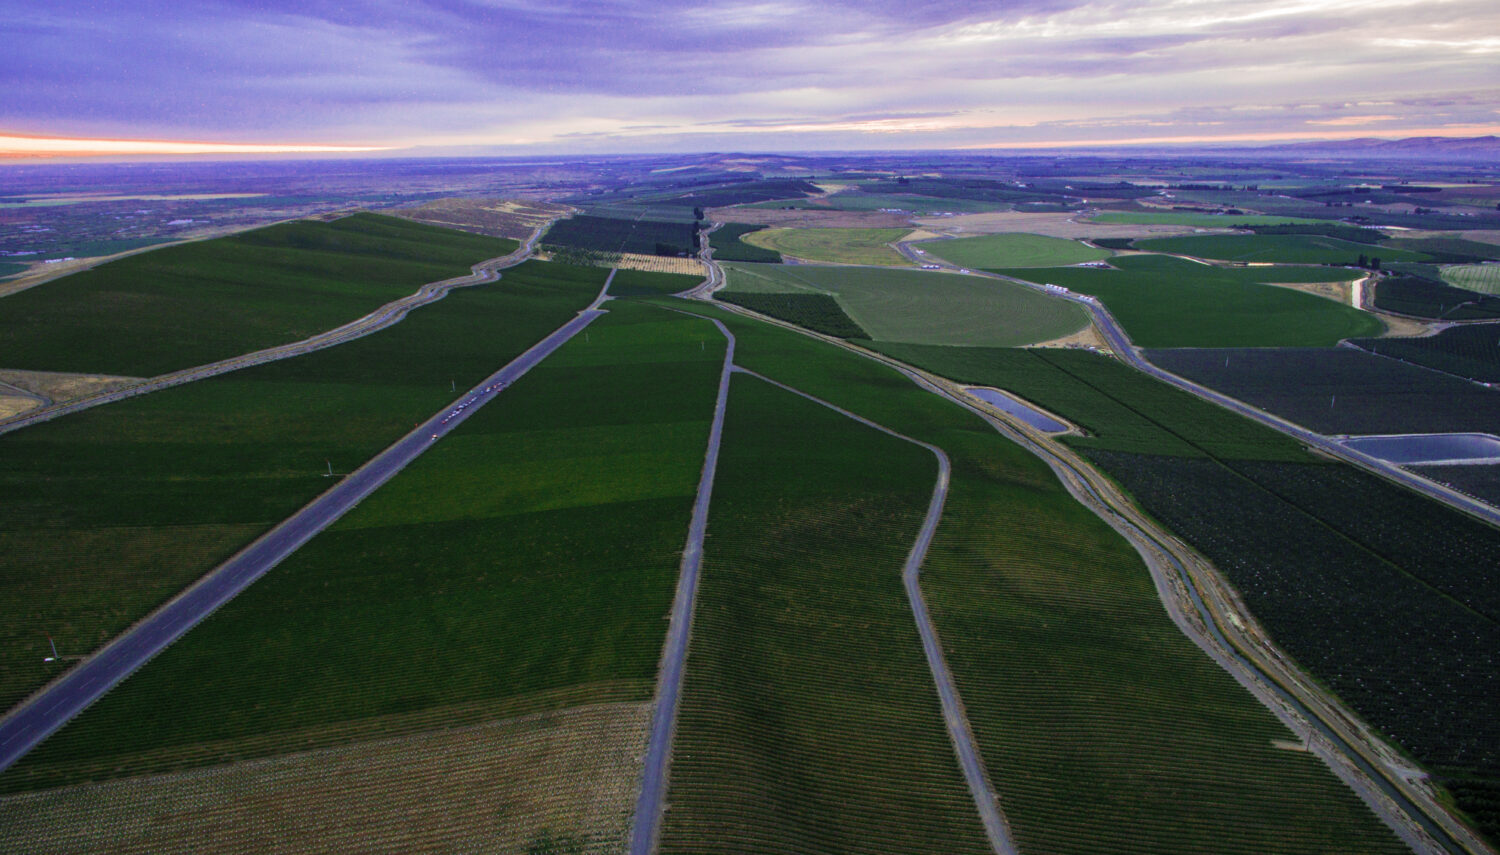 Aerial view of green vineyard blocks at twilight, divided by roads and stretching toward a blue horizon. The sky above is purple and blue.